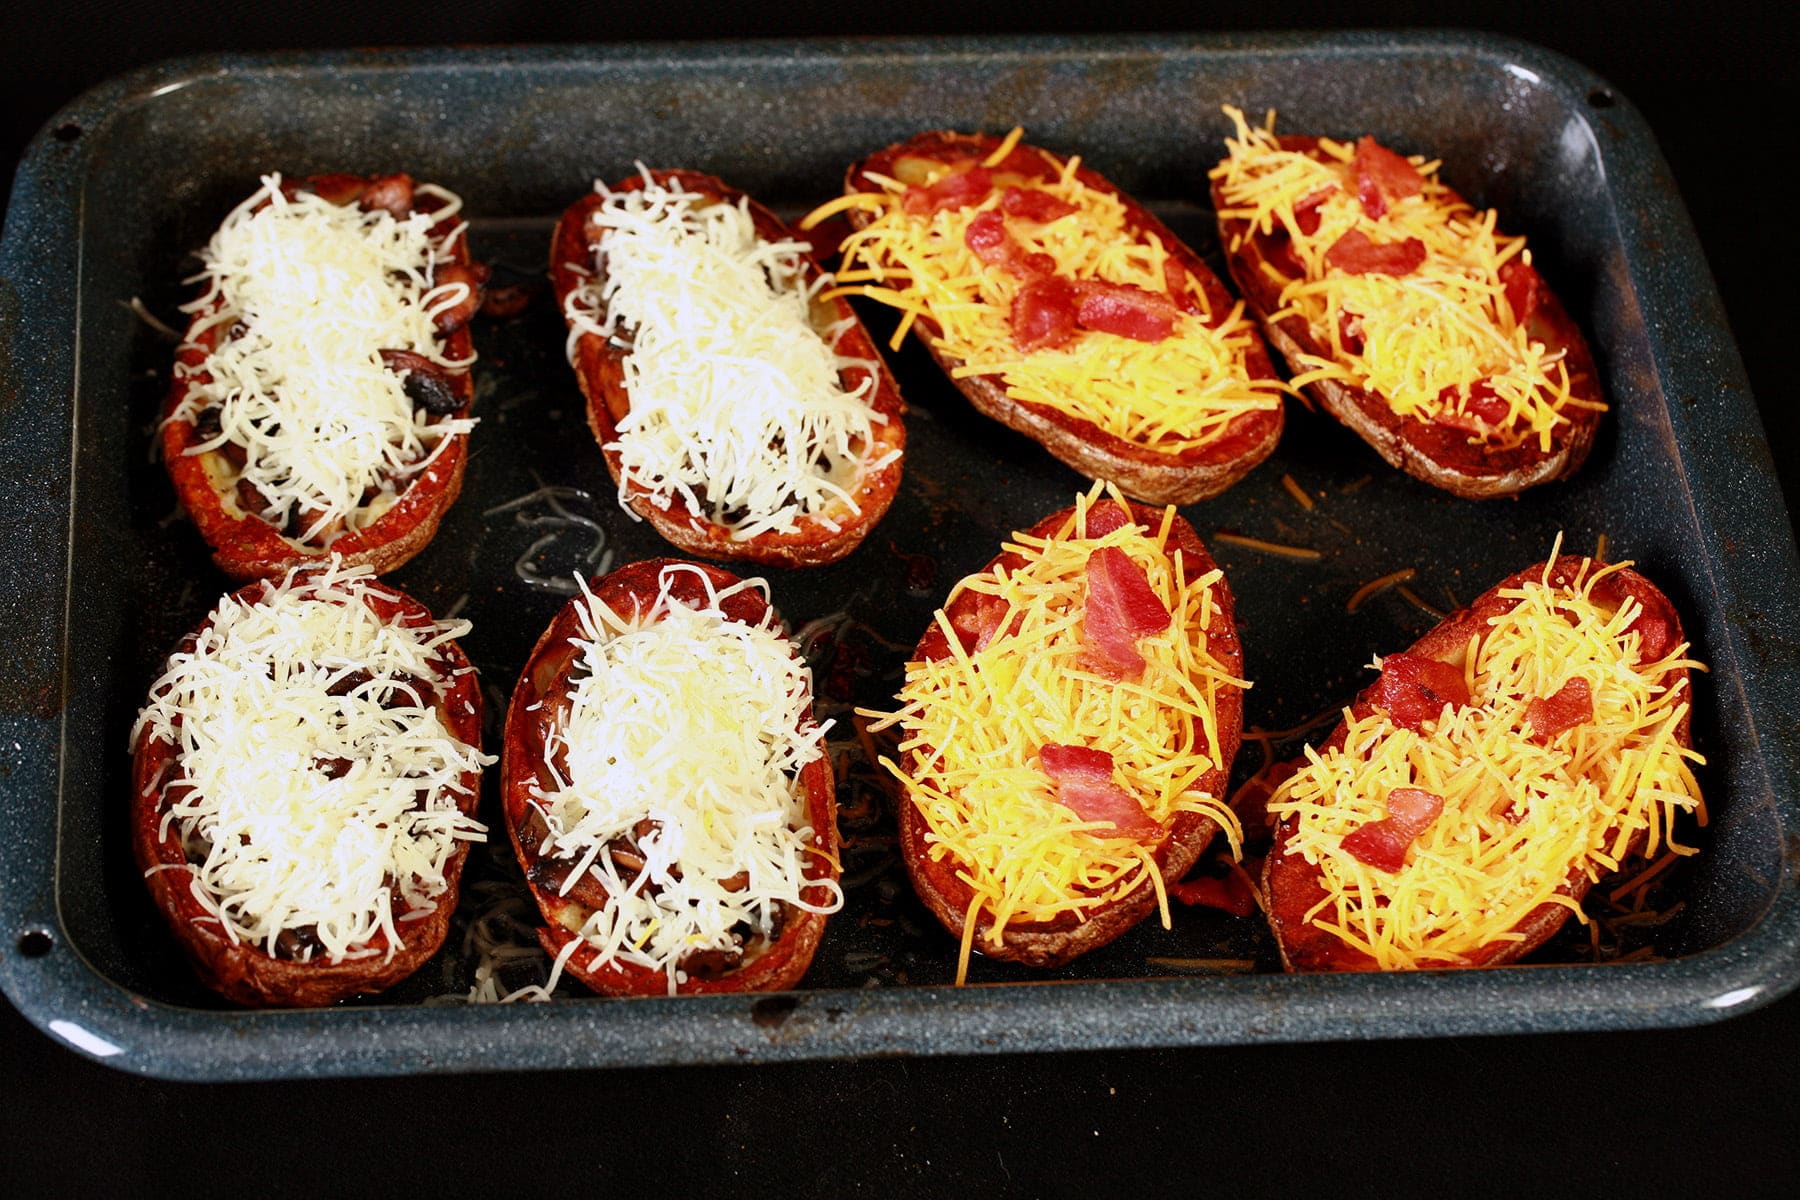 Hollowed out potato skins are arranged on a roasting pan. Half are filled with mushrooms and swiss cheese, the other half have bacon and cheddar as the filling.